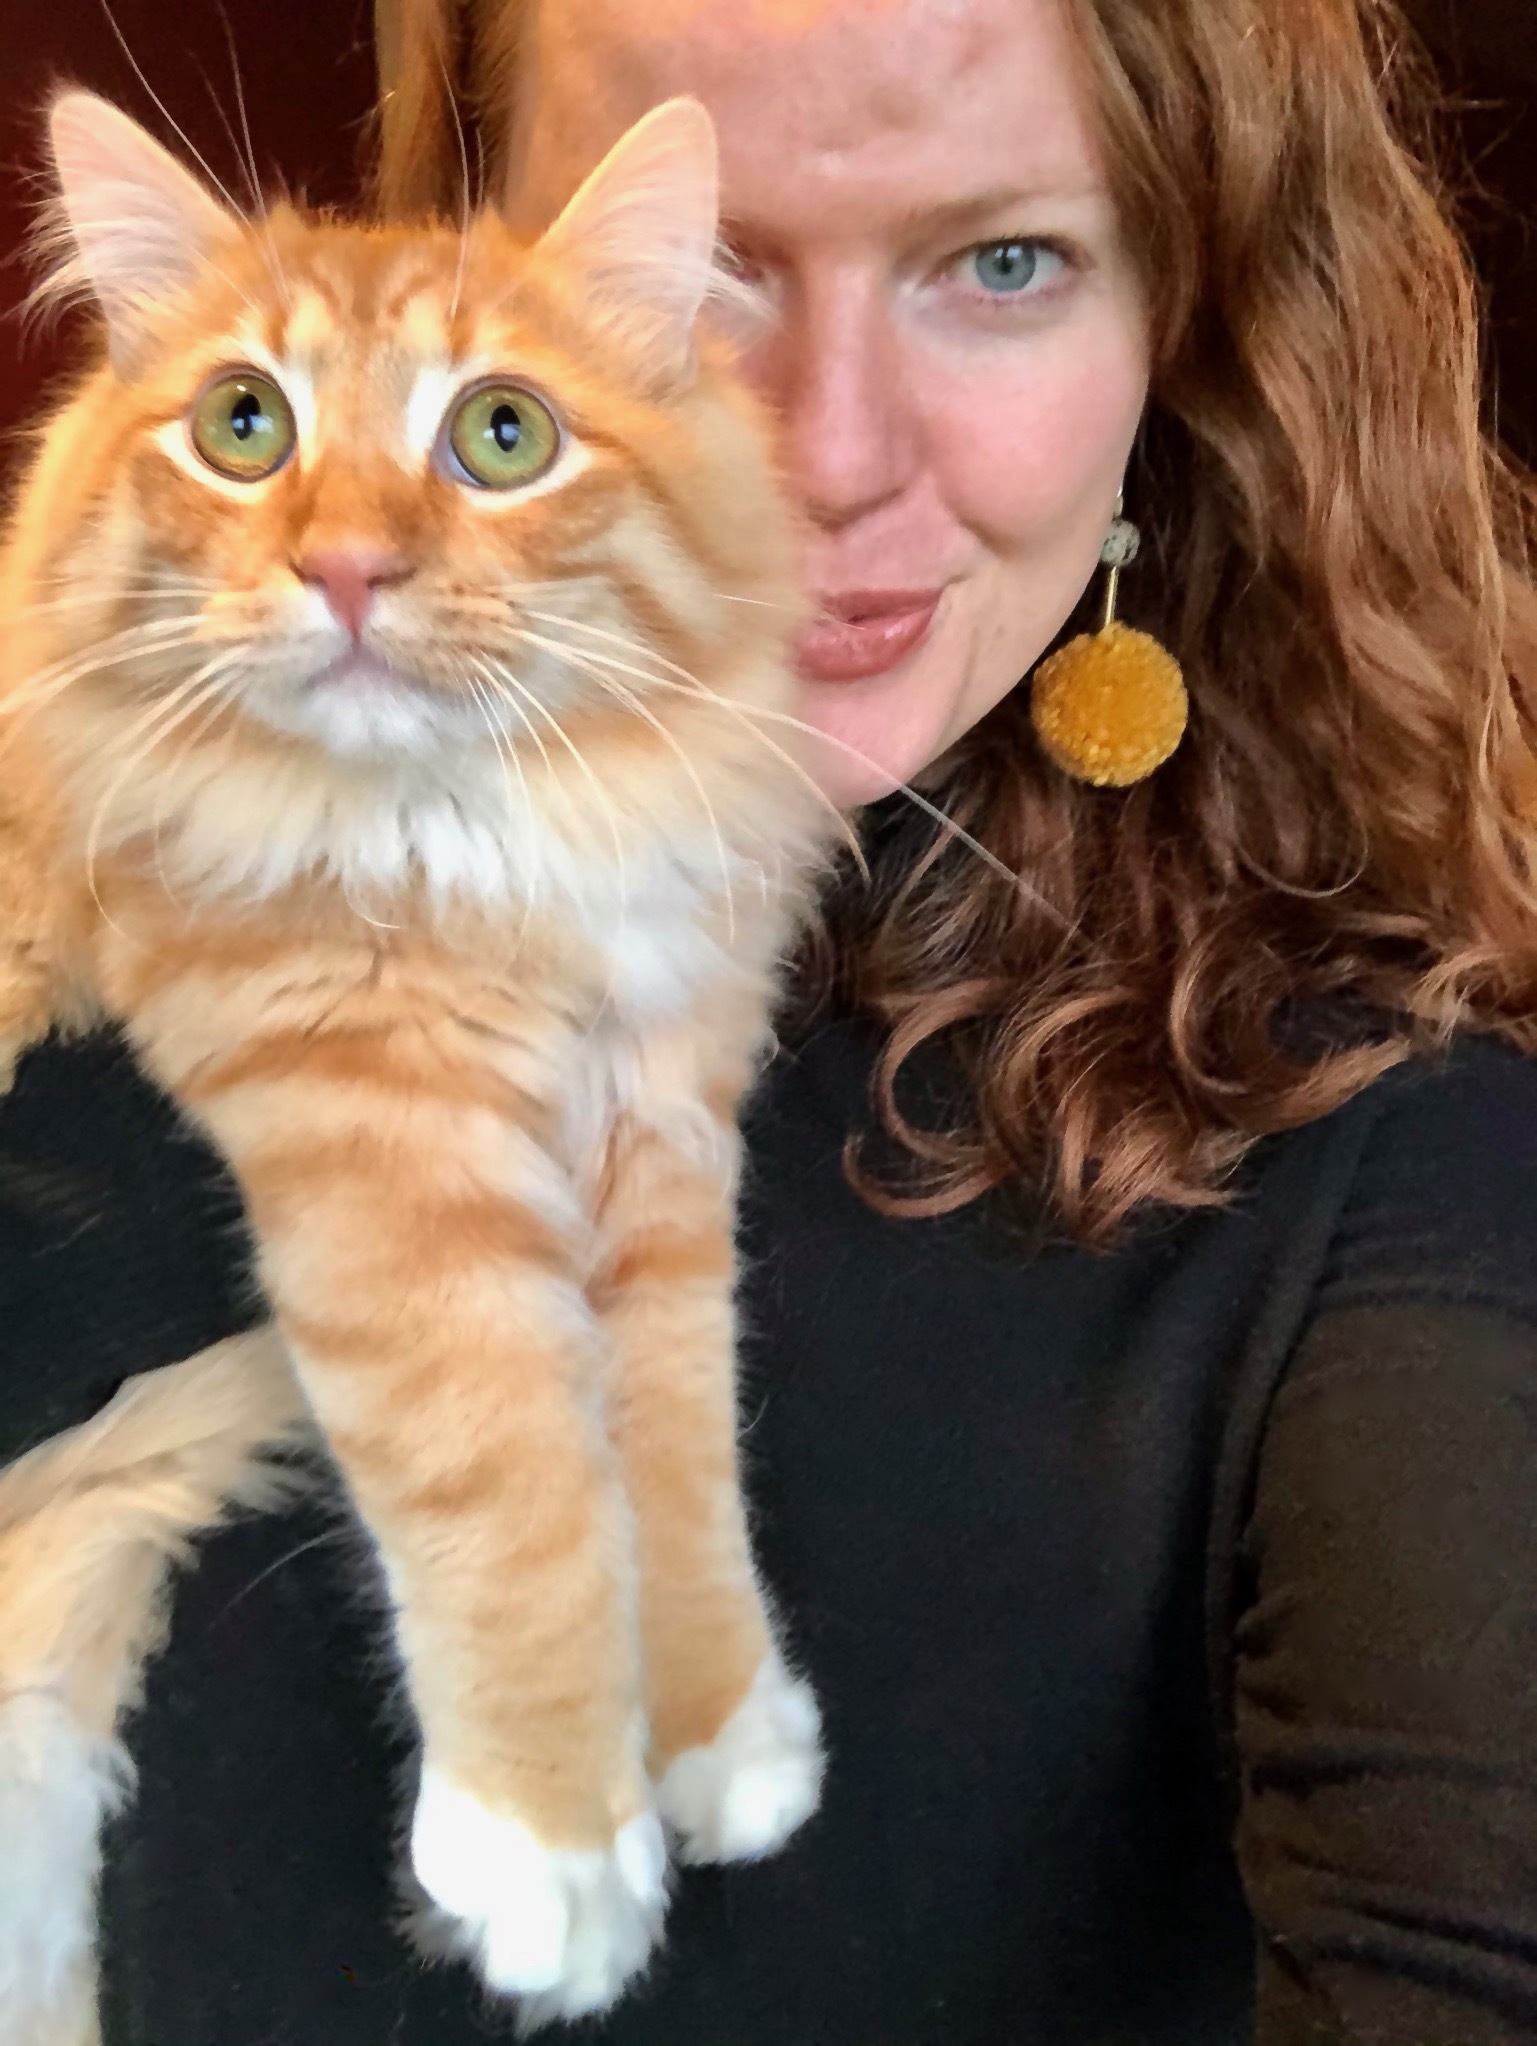  selfie of Krista with her cat. She is piercing her lips and is wearing a black turtle neck, yellow pom-pom earrings, and her red short hair is in curls. Her cat’s coloring is orange and white, and the cat has green eyes, which appear aghast. 